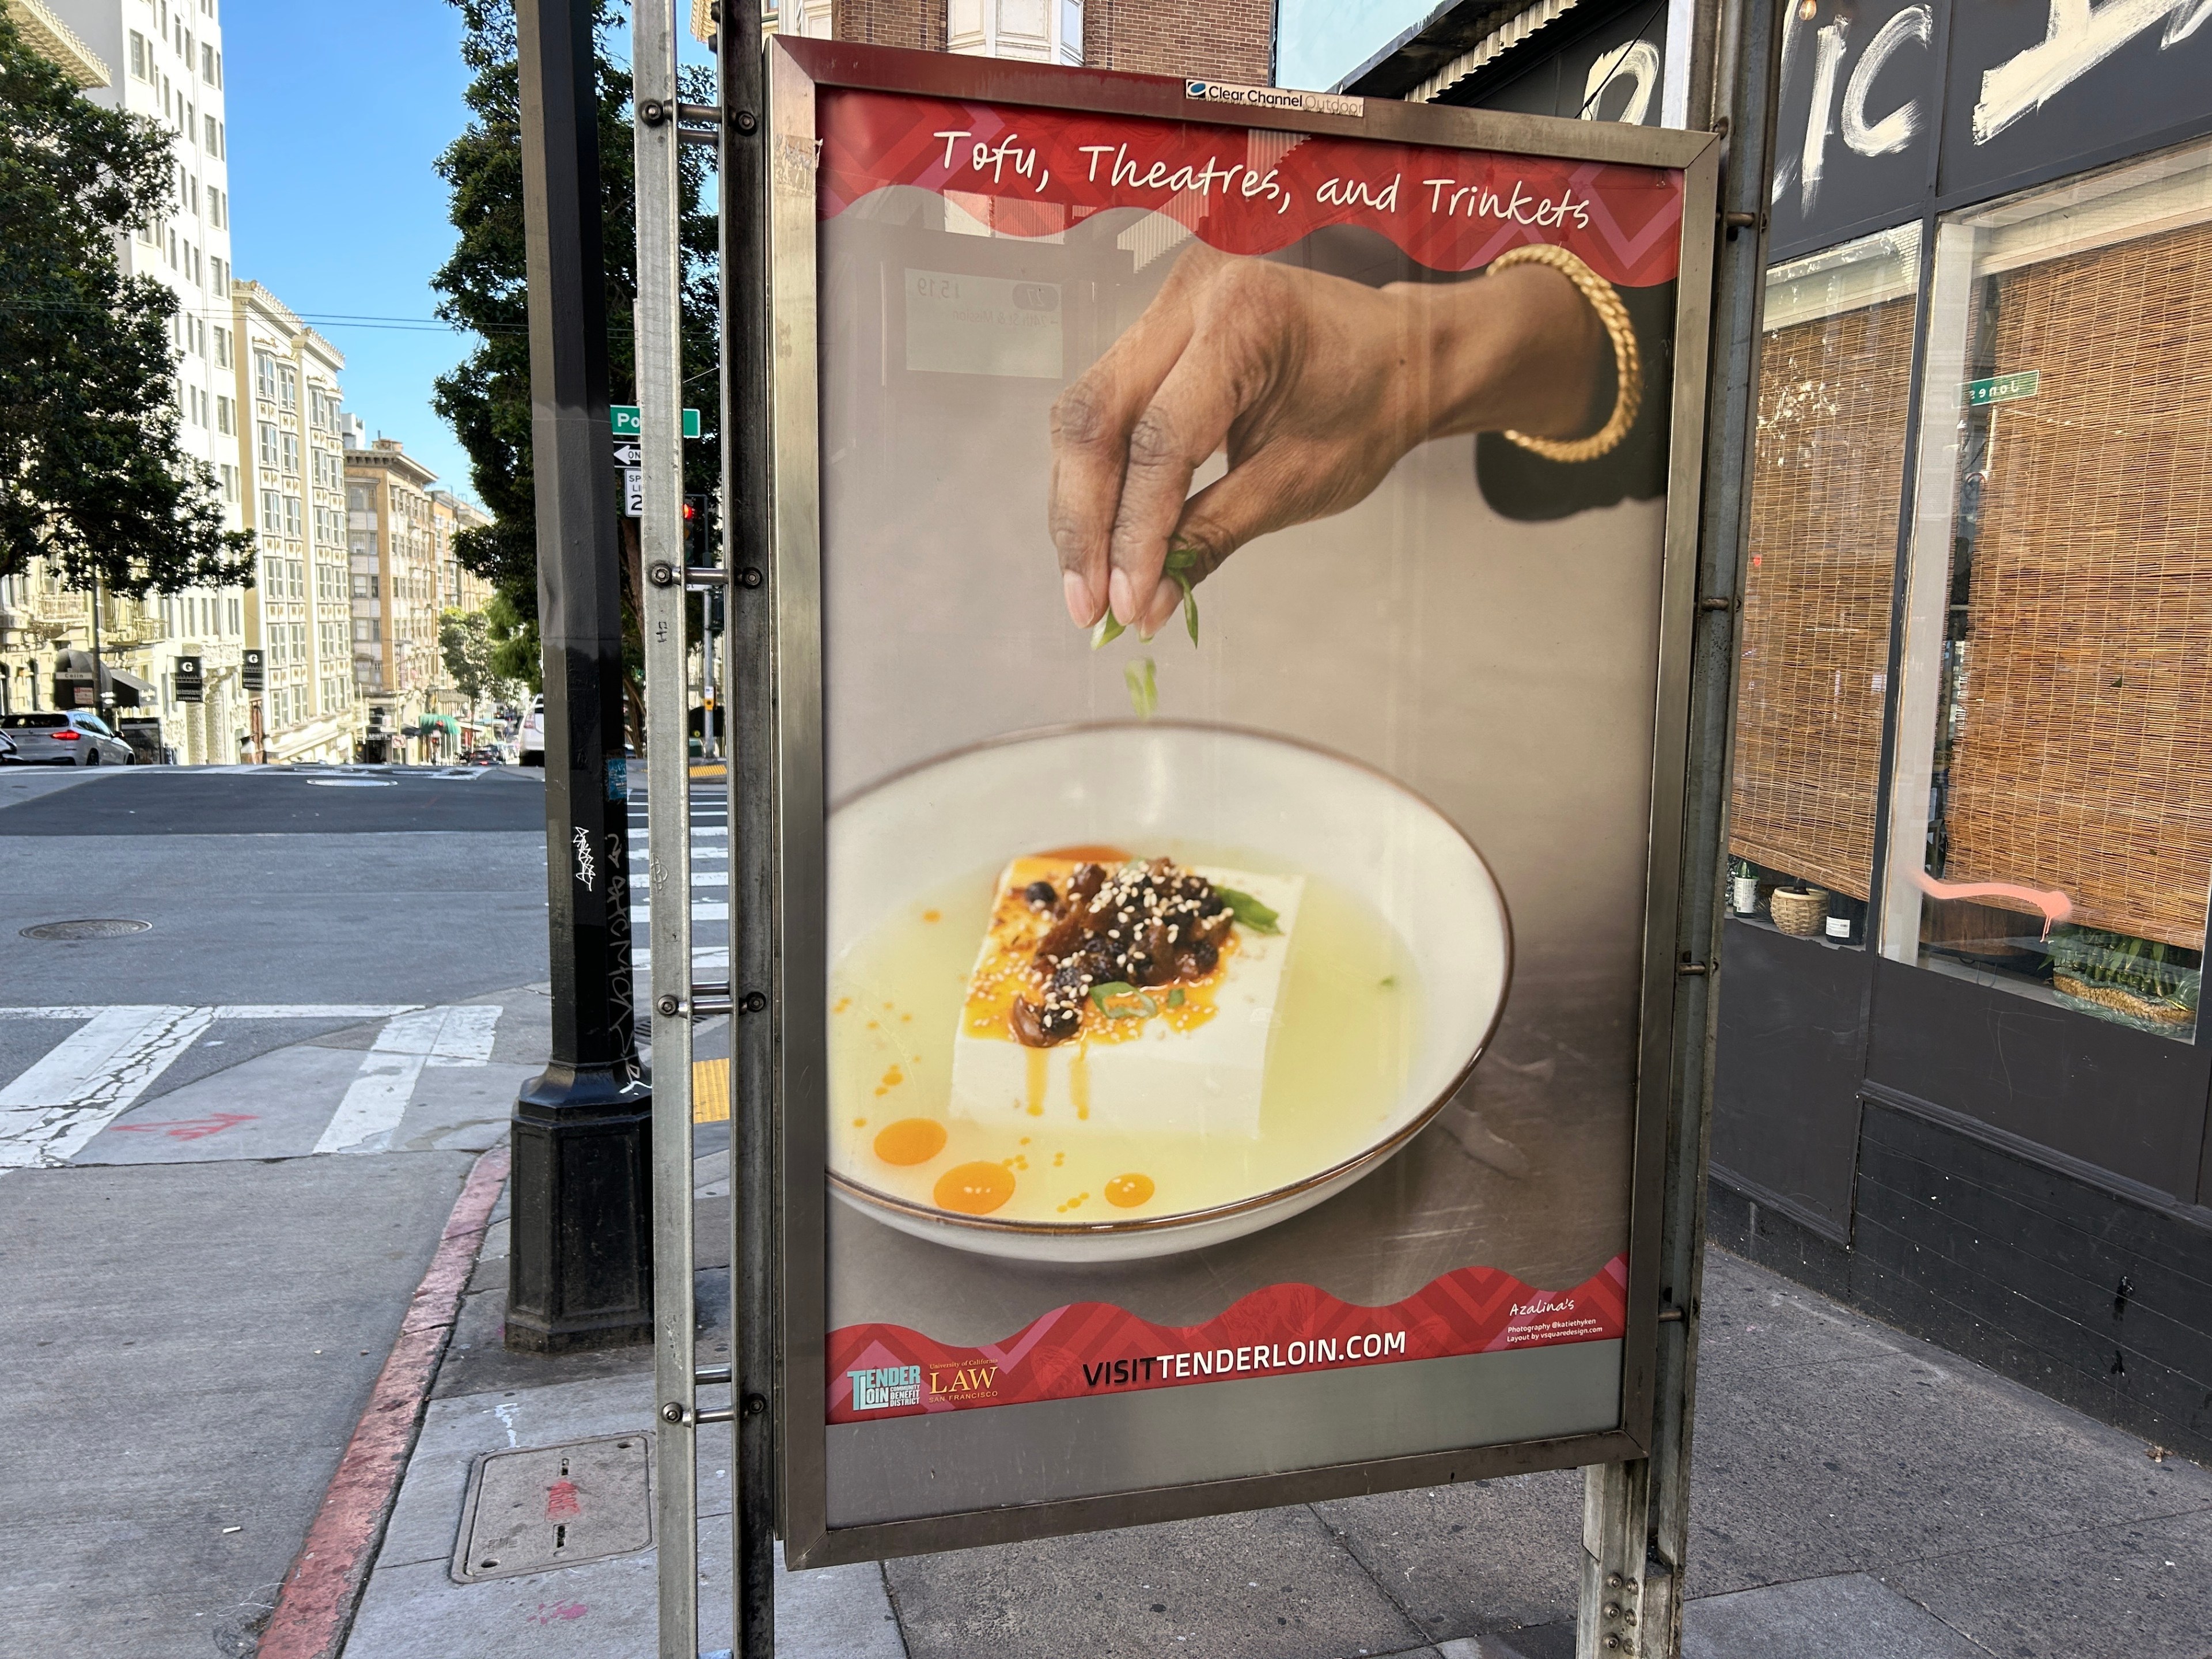 An outdoor ad depicts a hand garnishing a dish, with the text &quot;Tofu, Theatres, and Trinkets&quot; above. It's on a city street corner.